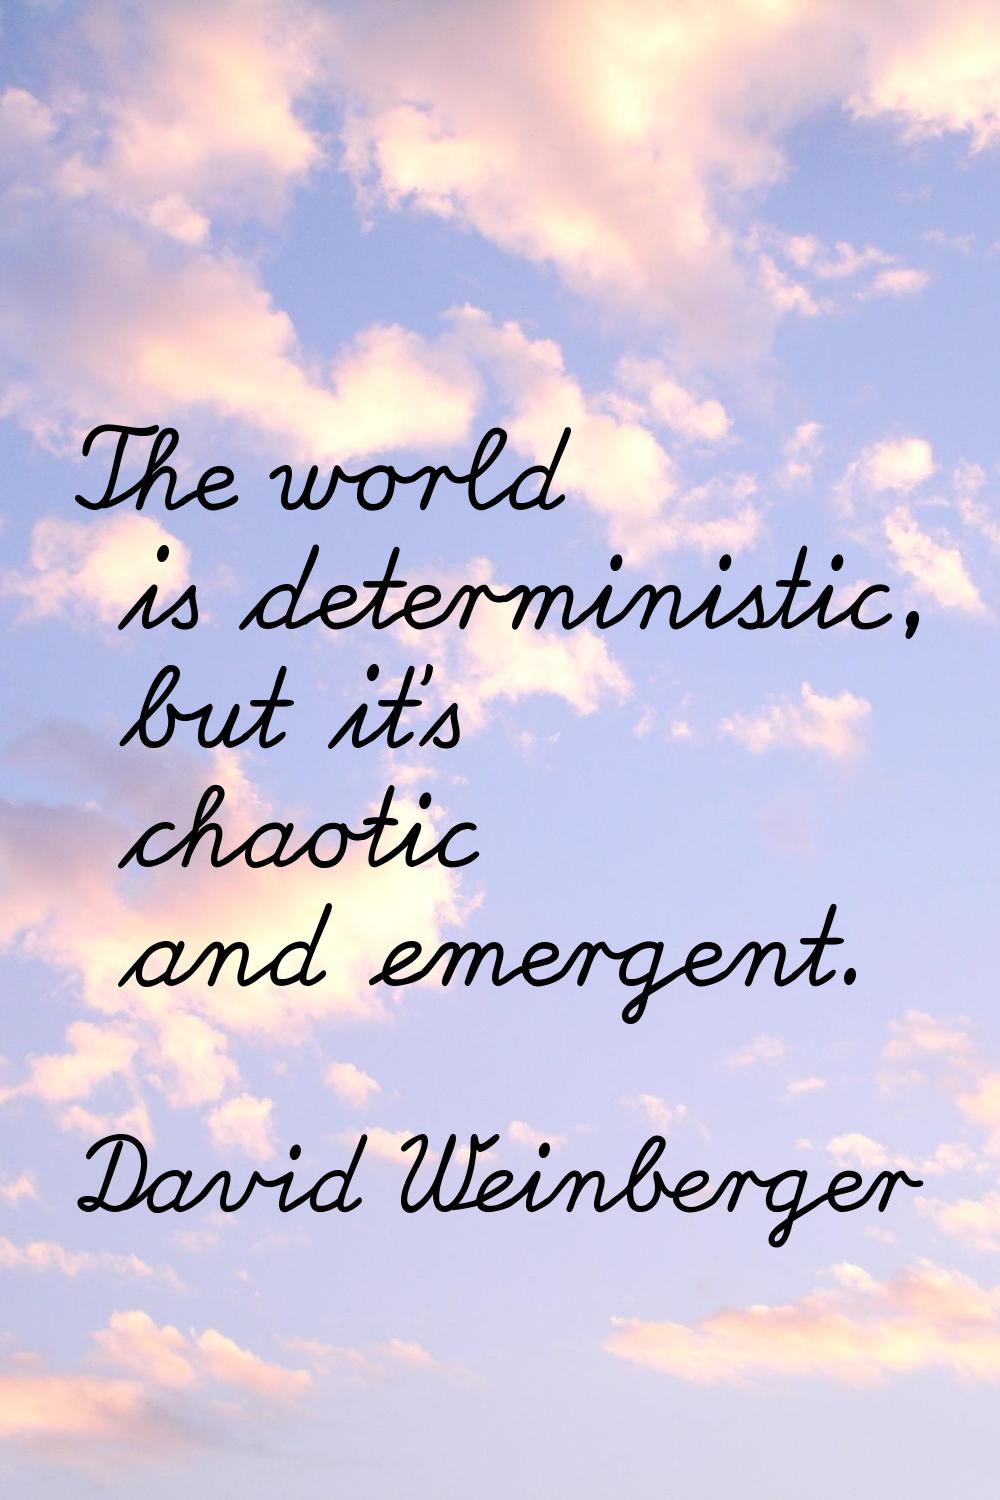 The world is deterministic, but it's chaotic and emergent.